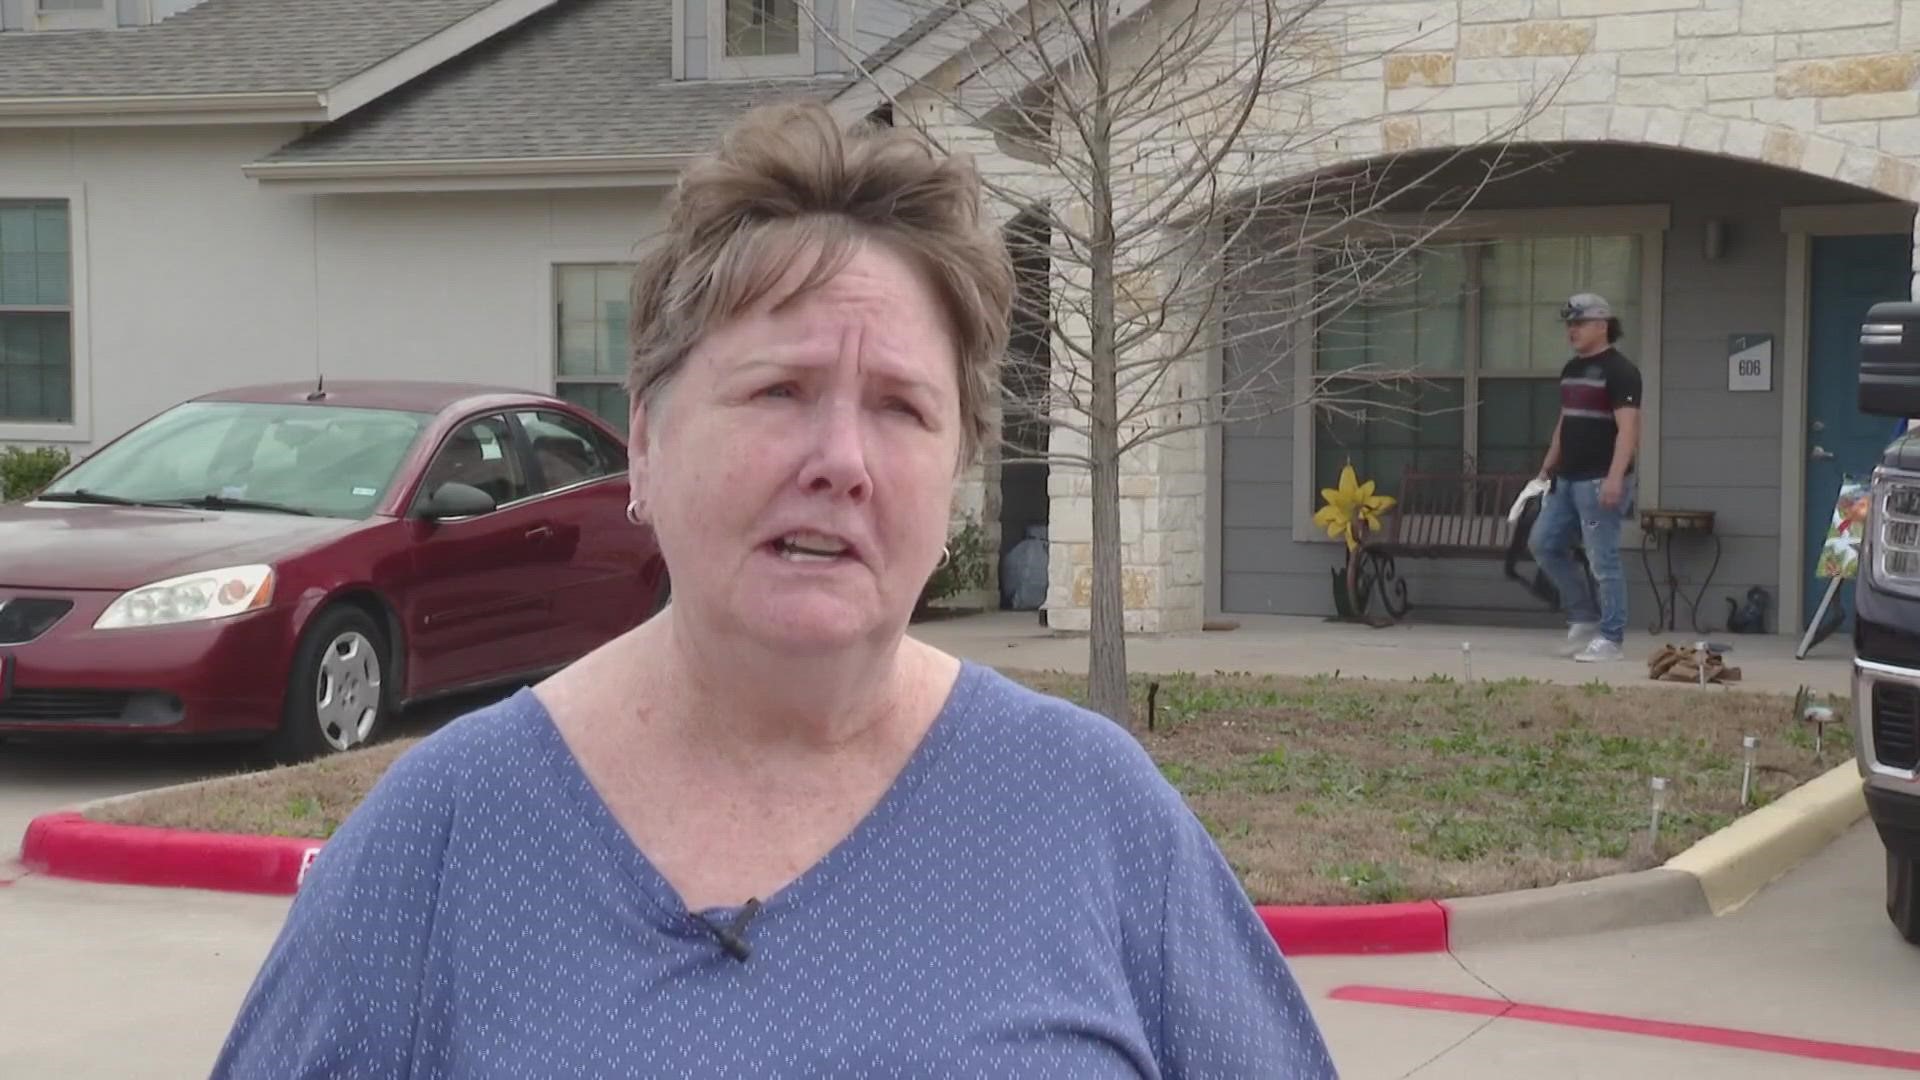 6 News was able to help 71-year-old Theresa Carr after her she said the Reserve at Dry Creek management was in no hurry to fix apartment damage.